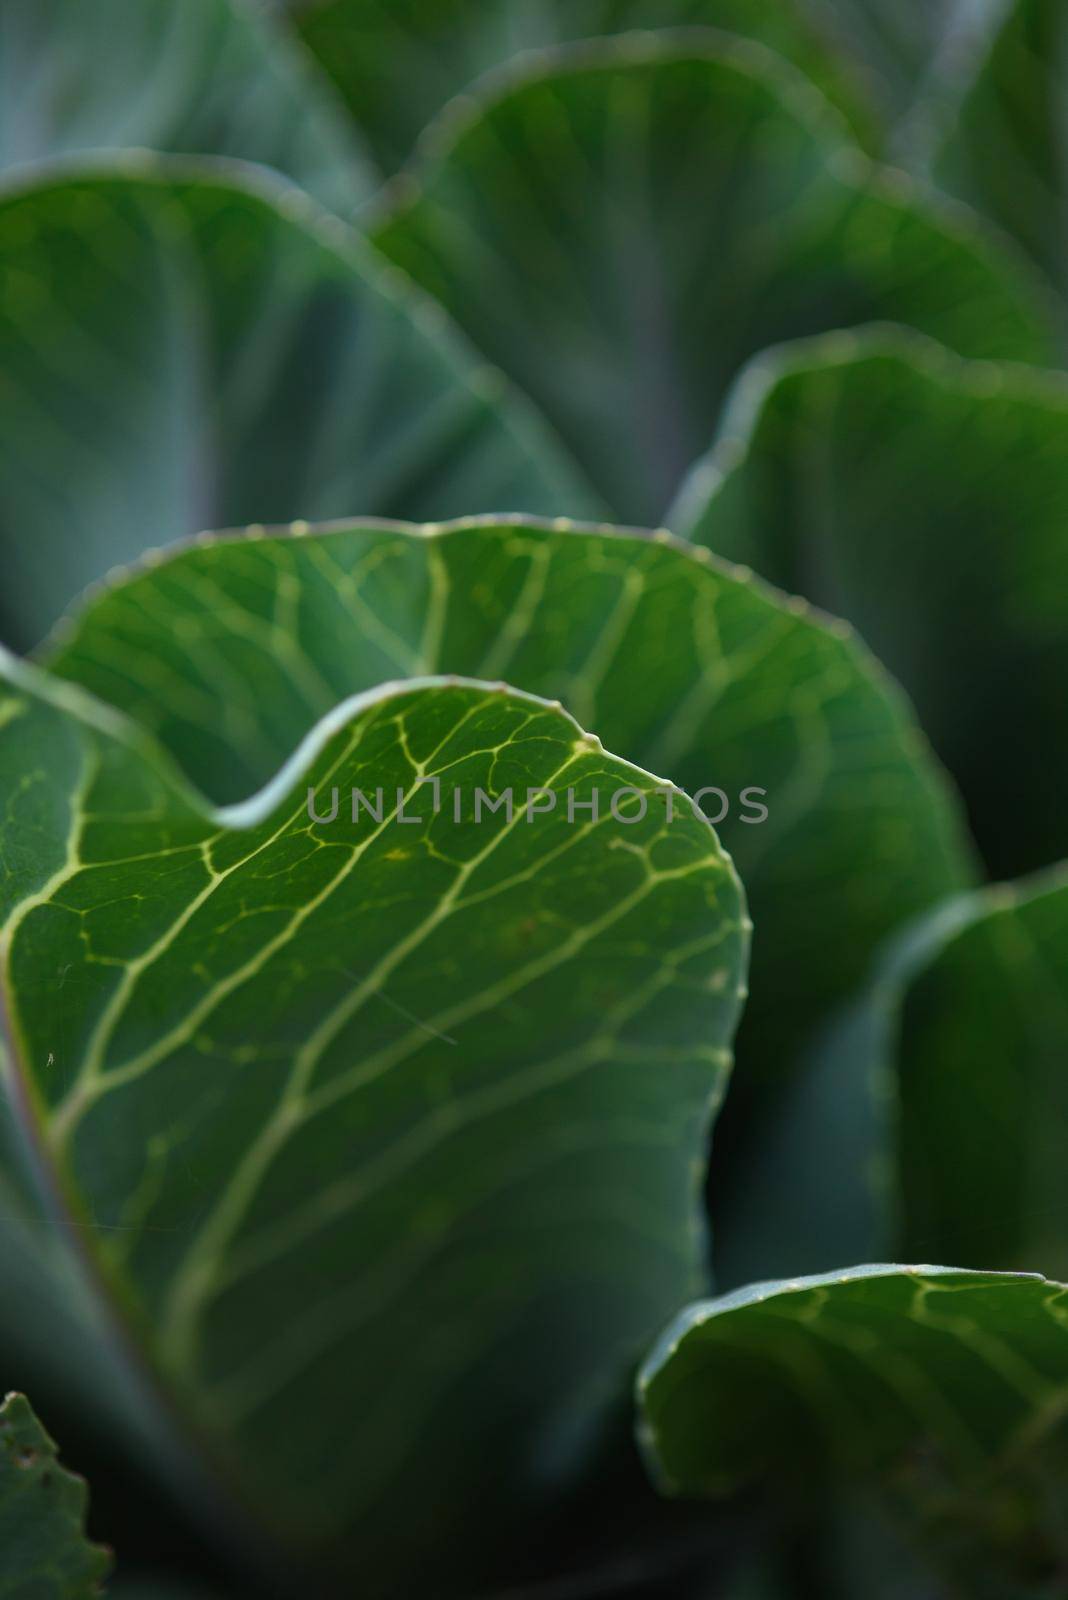 Close up background. Green leaf of cabbage in the backlight with streaks and holes eaten by insects.